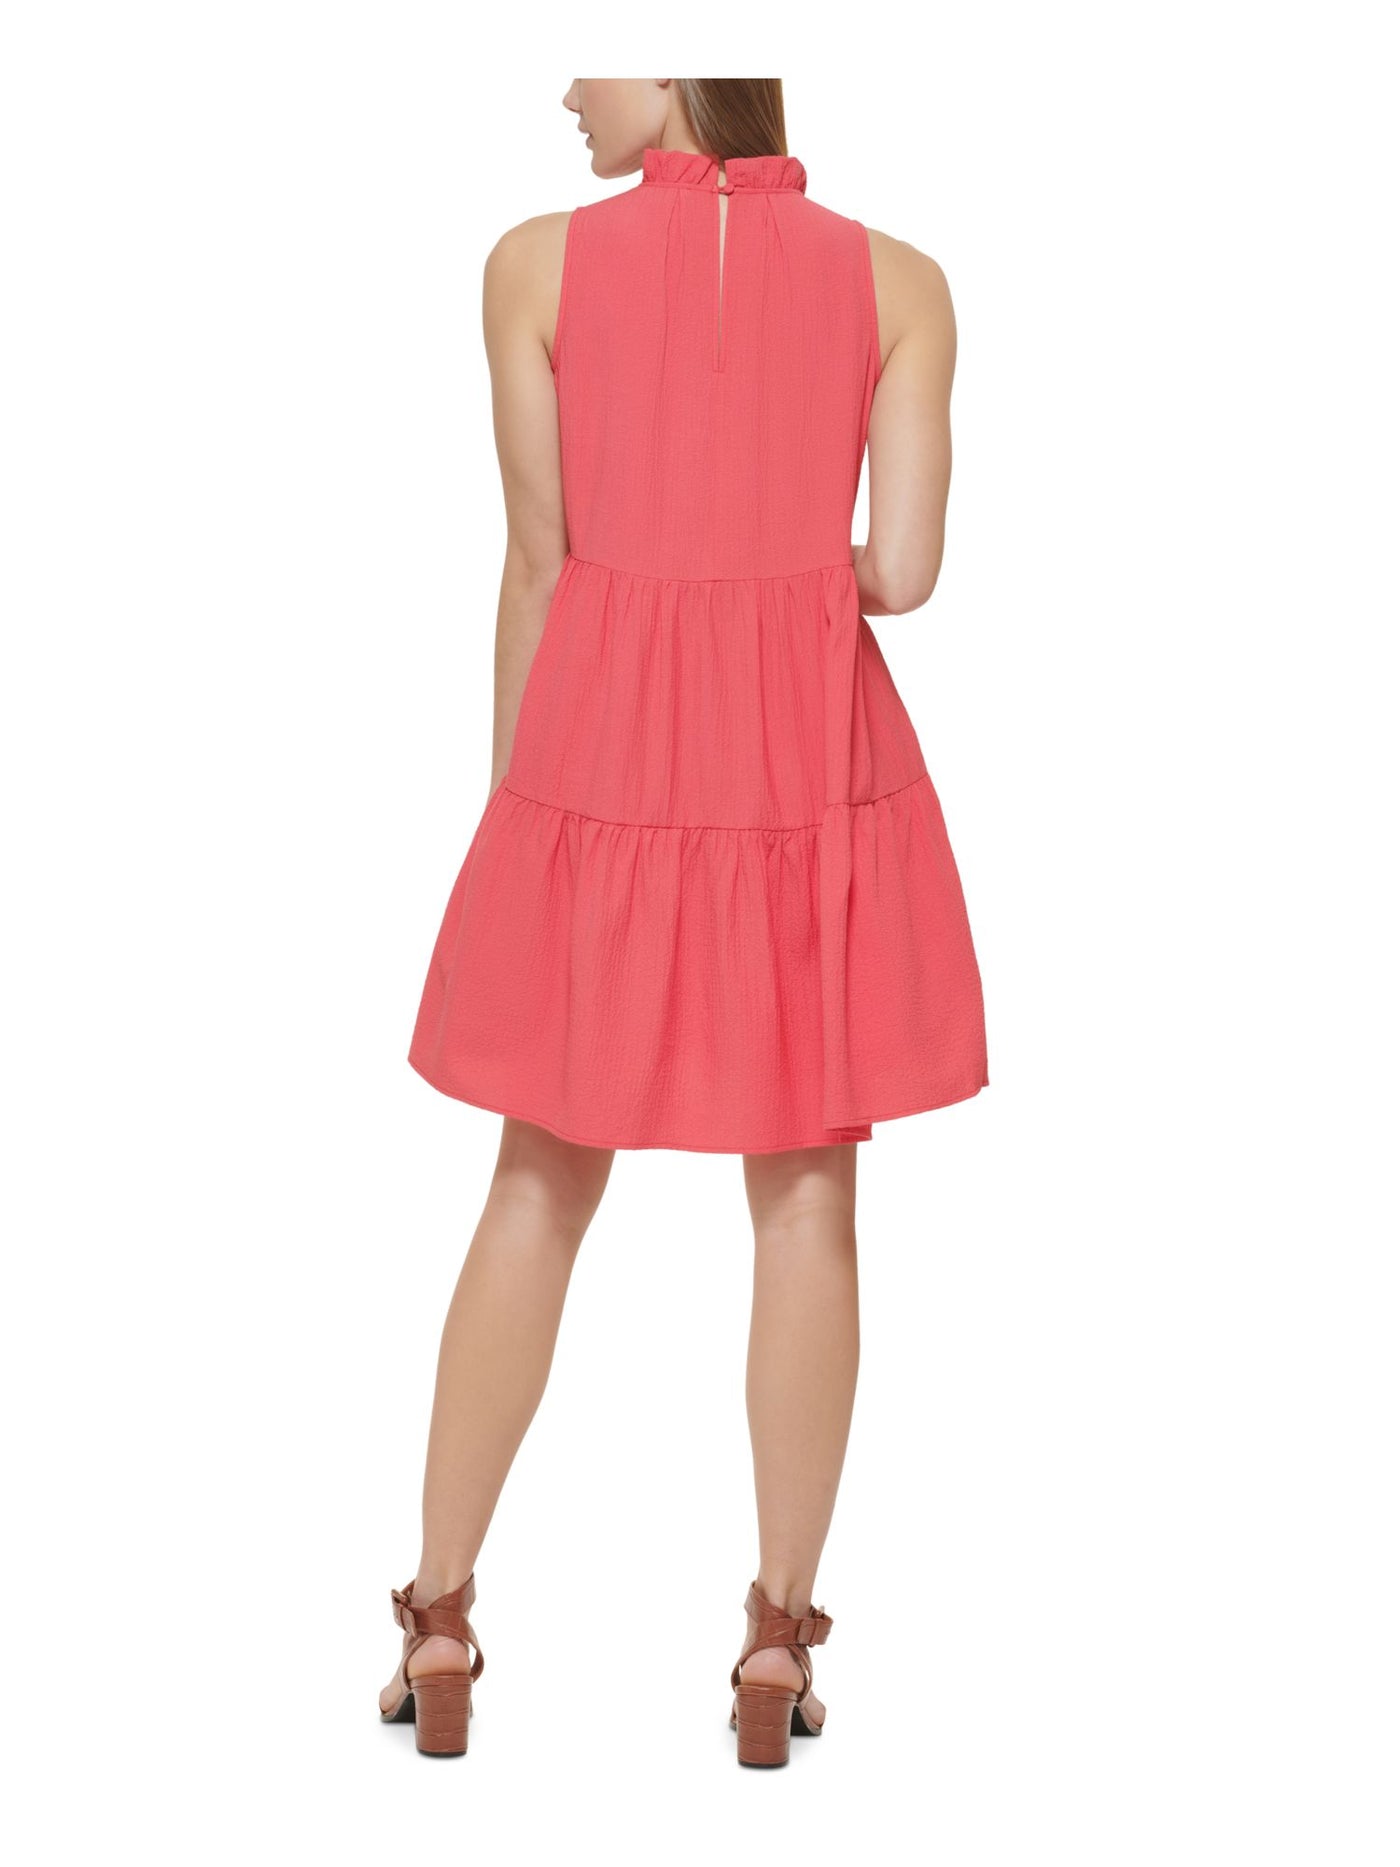 CALVIN KLEIN Womens Pink Pocketed Ruffled Back Button Keyhole Tiered Sleeveless Mock Neck Above The Knee A-Line Dress 12